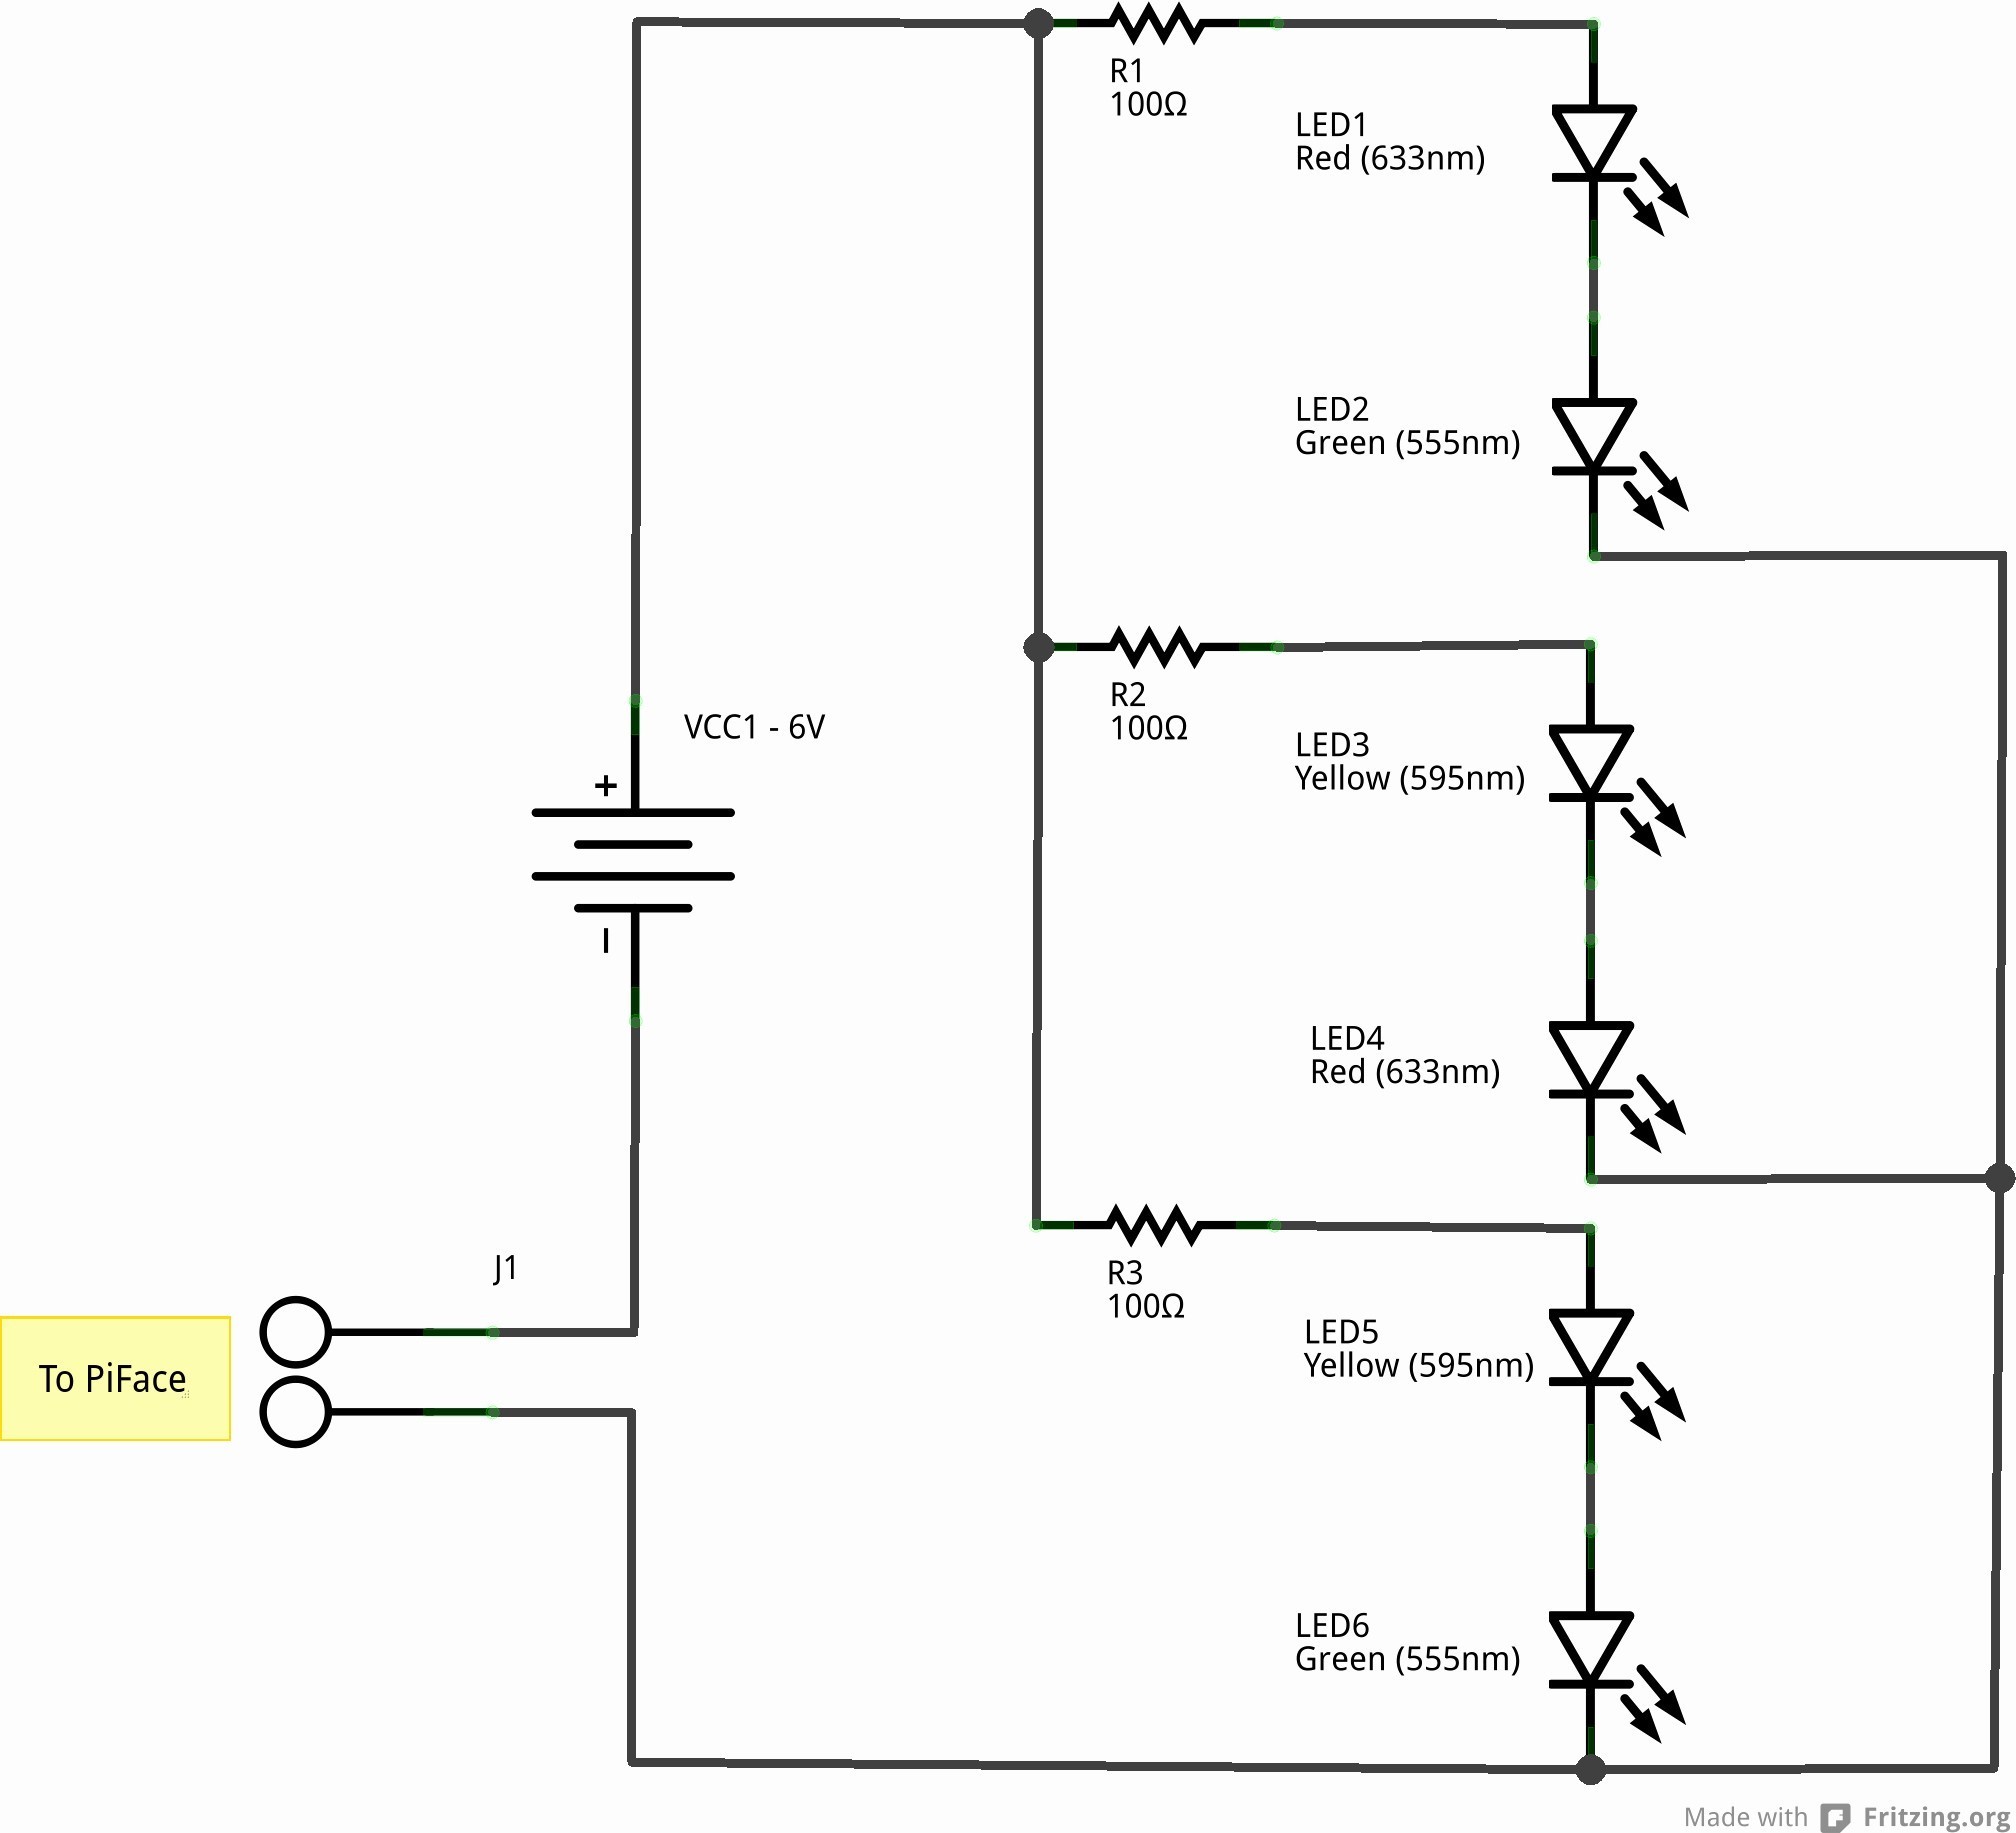 Wiring Diagram Led Christmas Lights Fresh Christmas Tree Light Circuit Diagram New – Wiring Diagram Collection